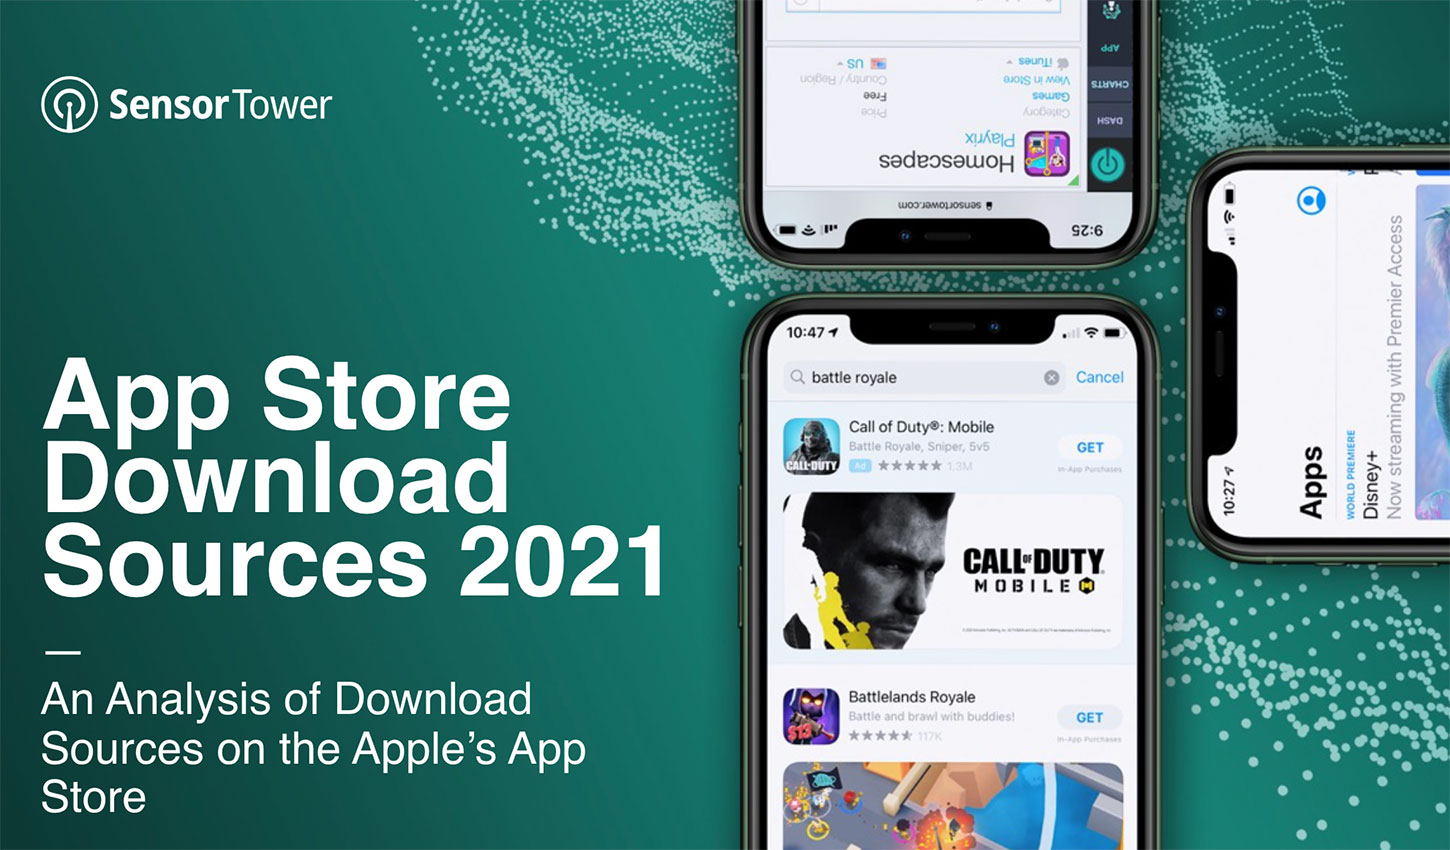 Sensor Tower's new report on App Store download sources found that search bounced back to account for 59 percent of worldwide installs in 2020.